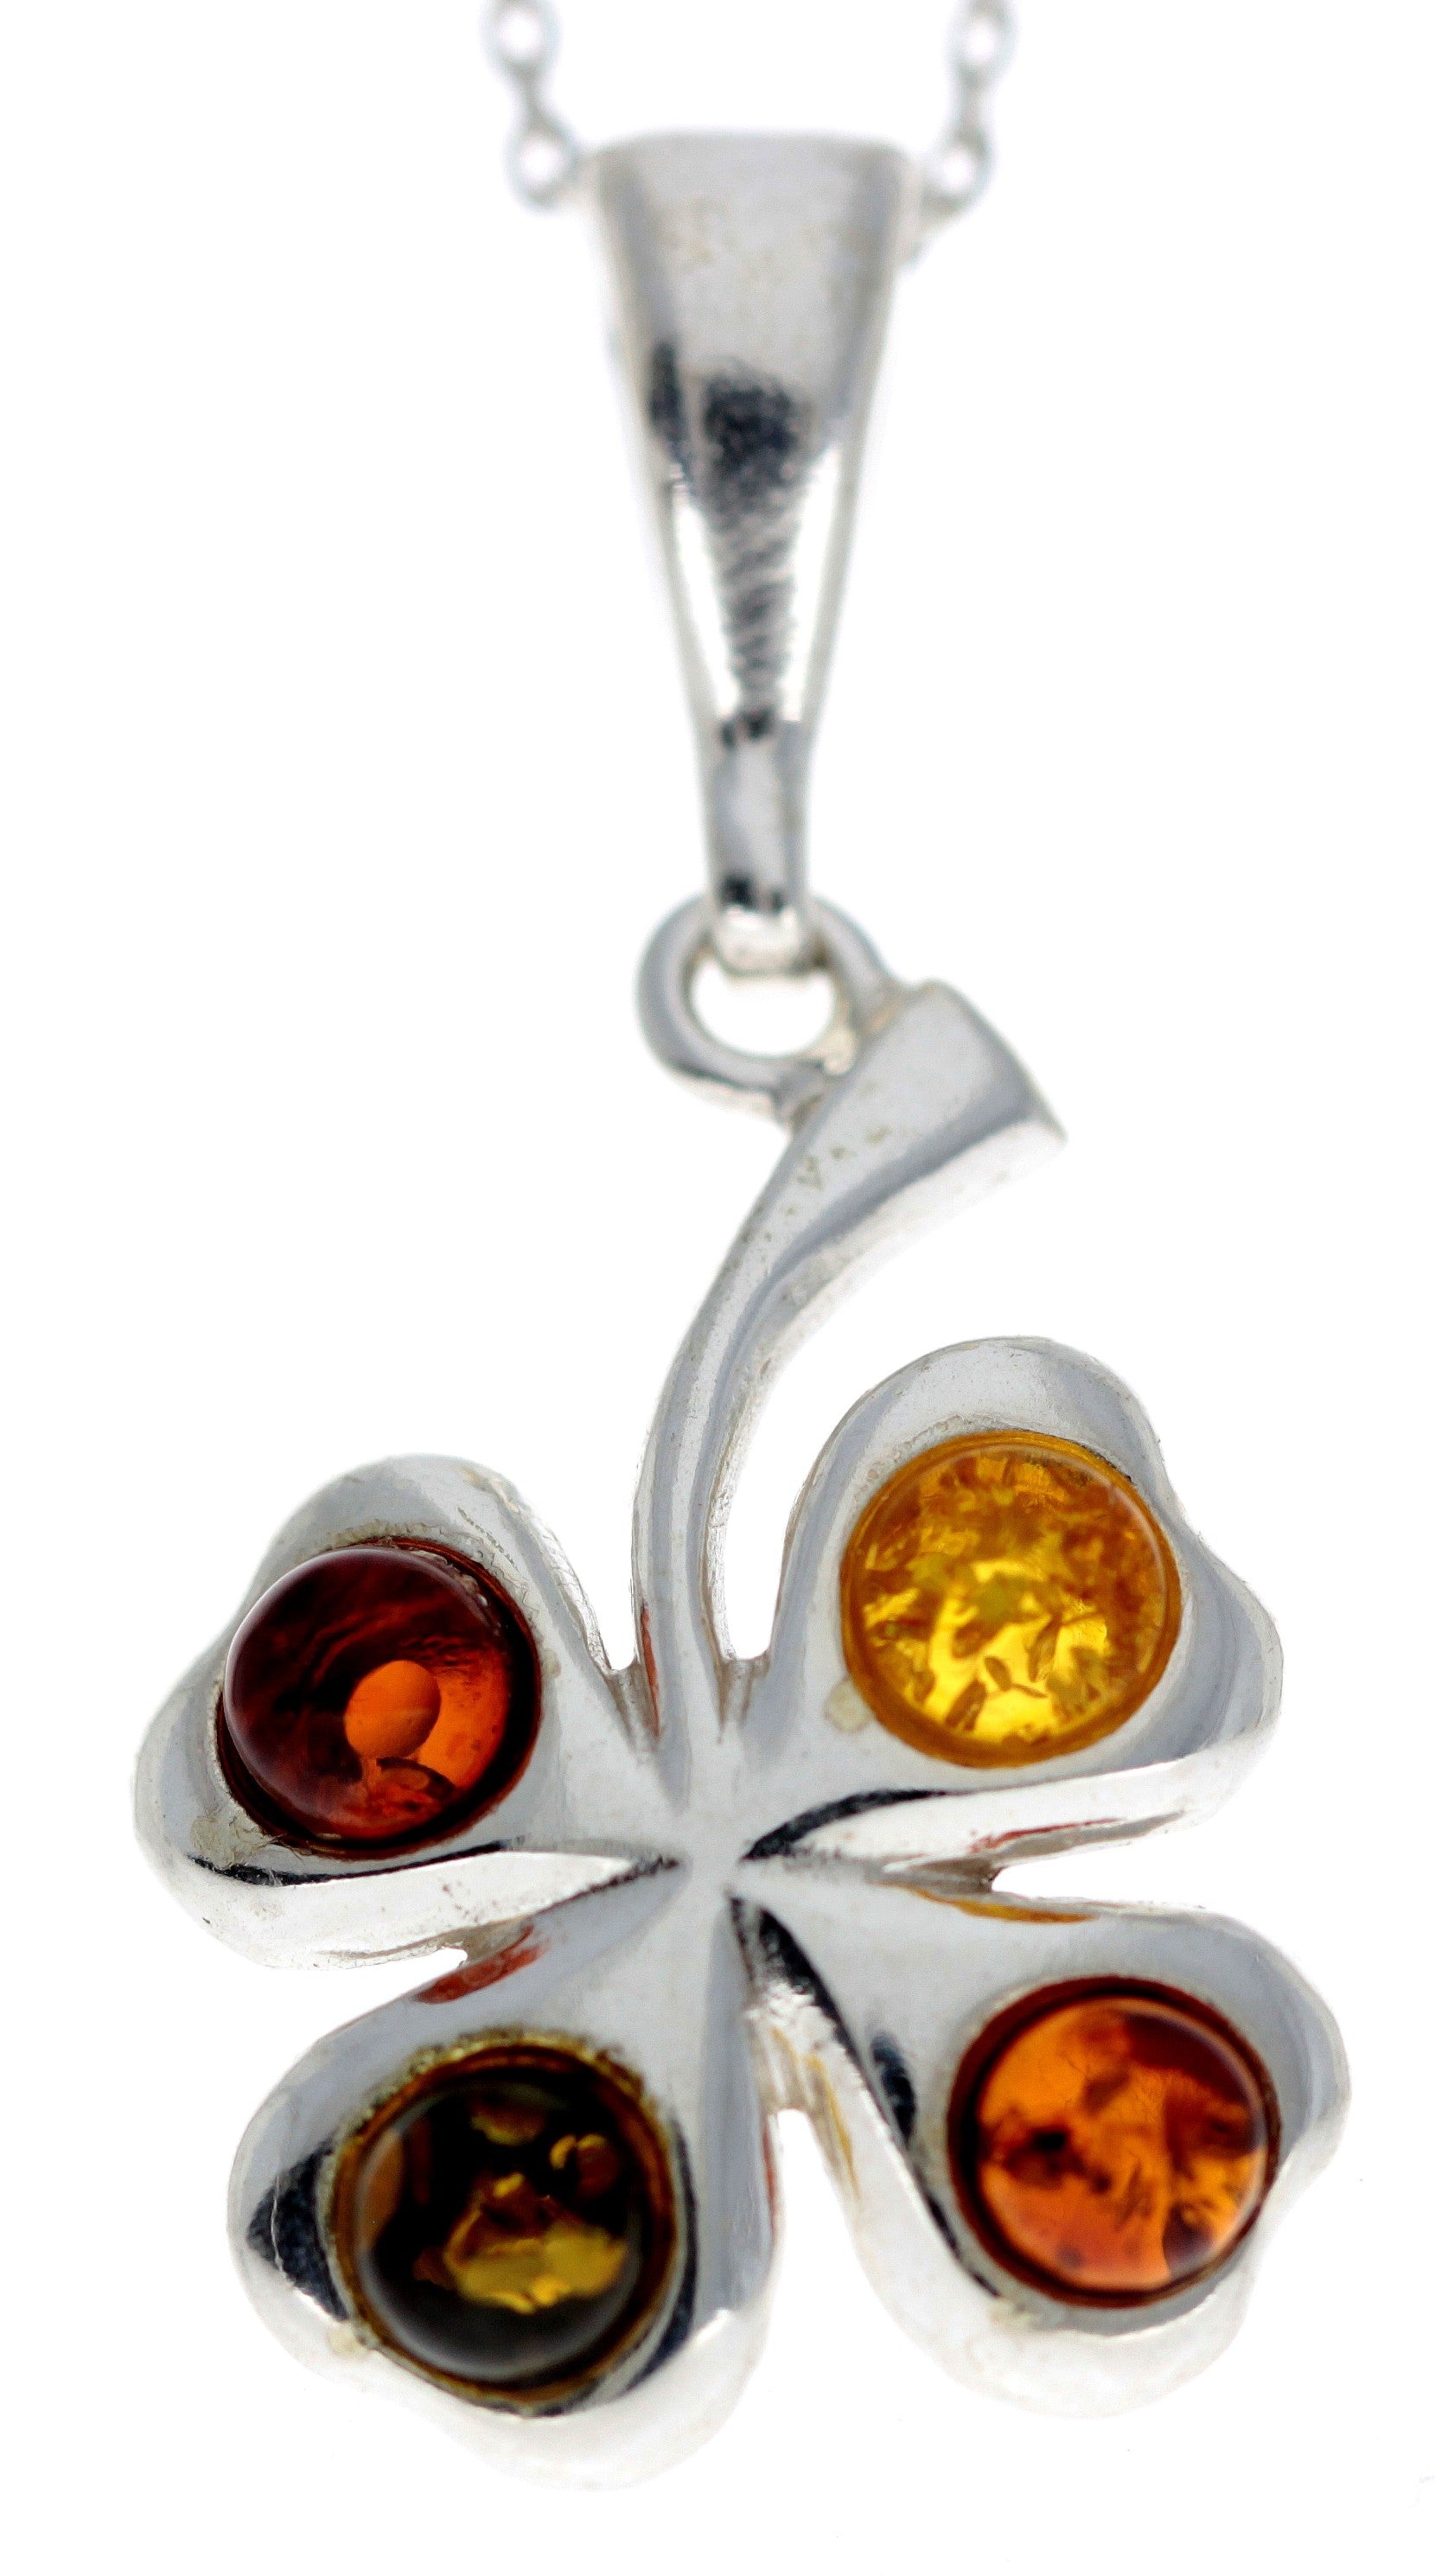 925 Sterling Silver Lucky Clover Pendant with Baltic Amber - G222